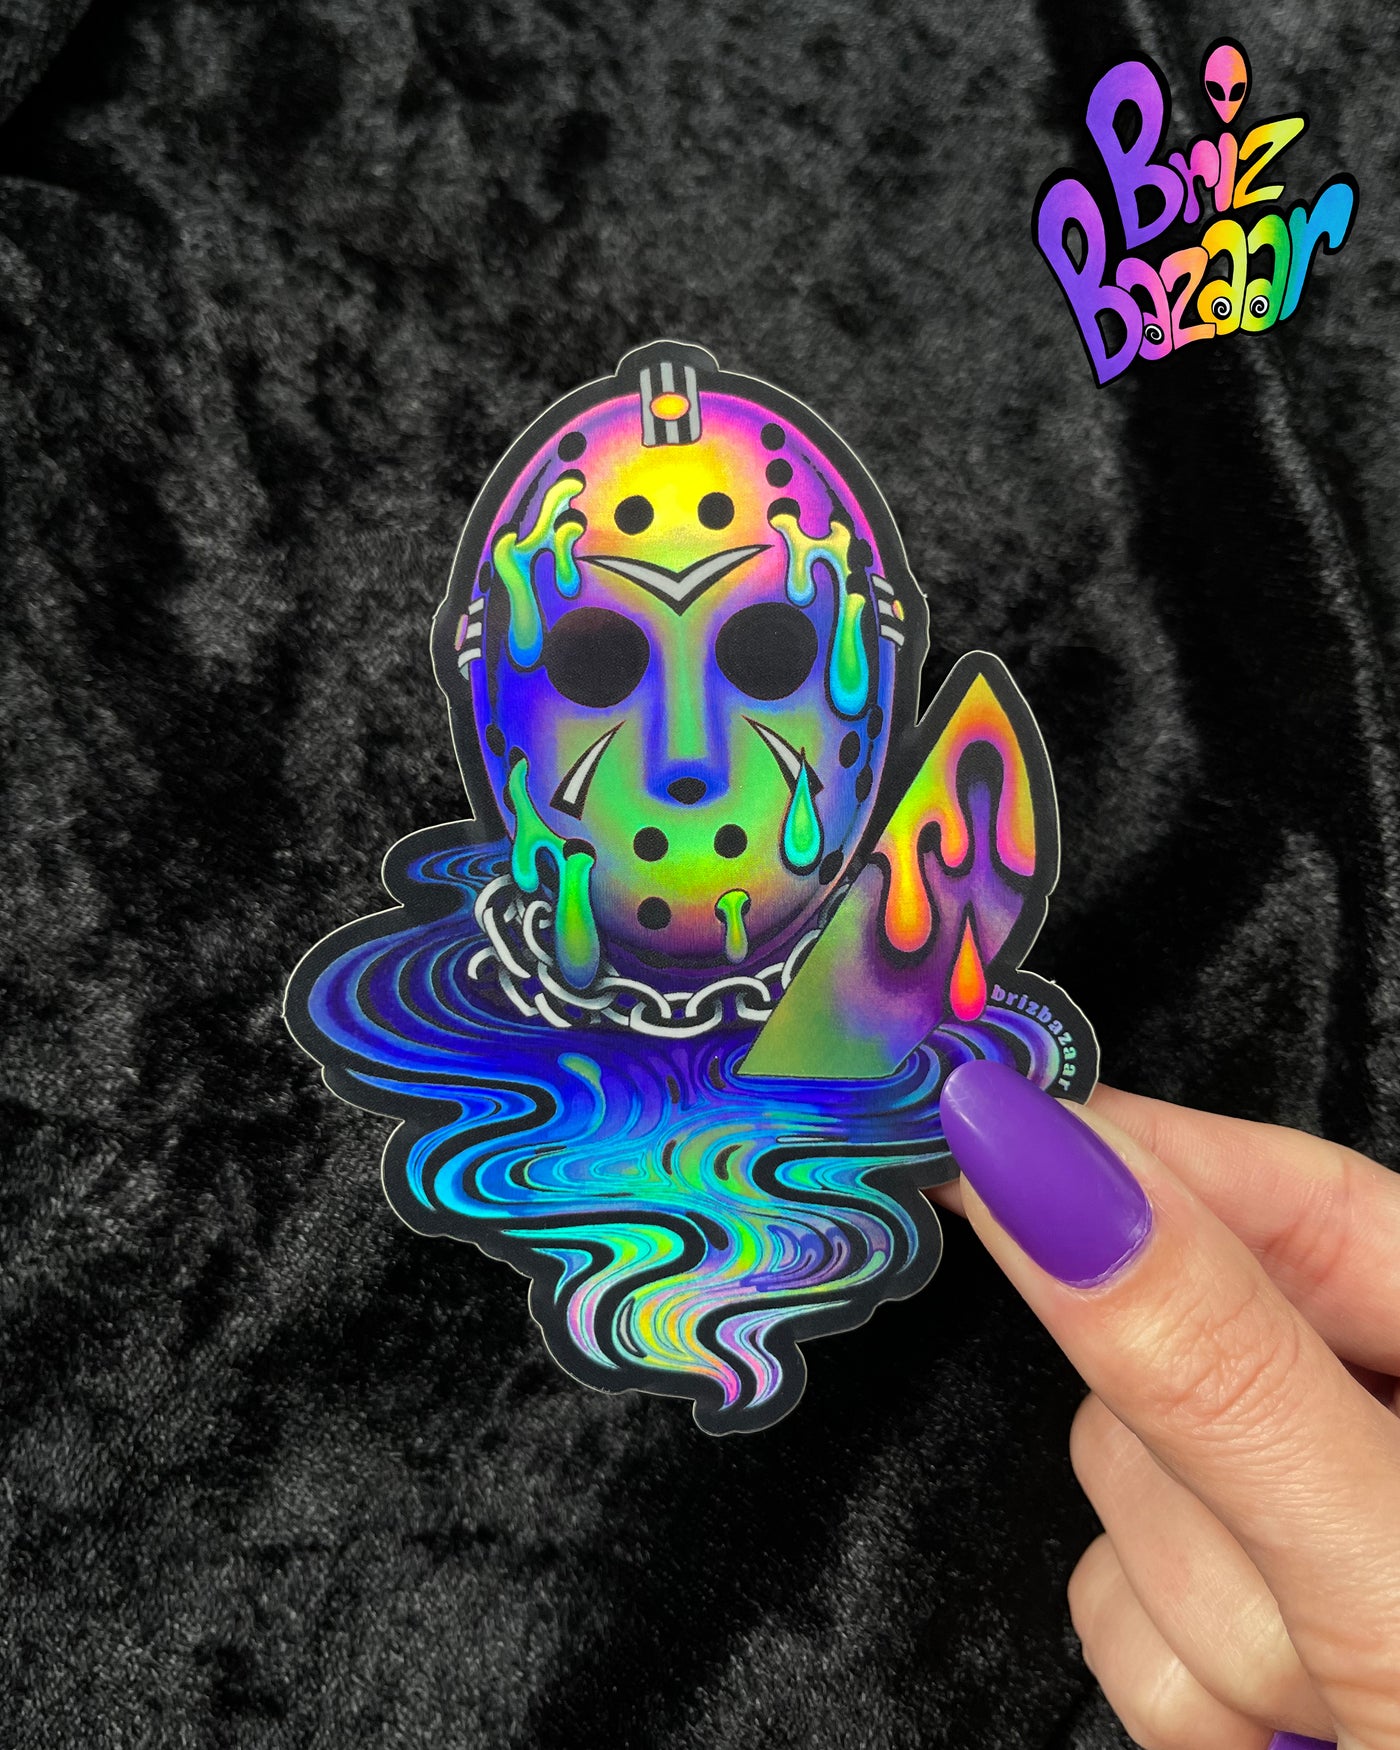 Holographic sticker of PSYDAY THE 13TH